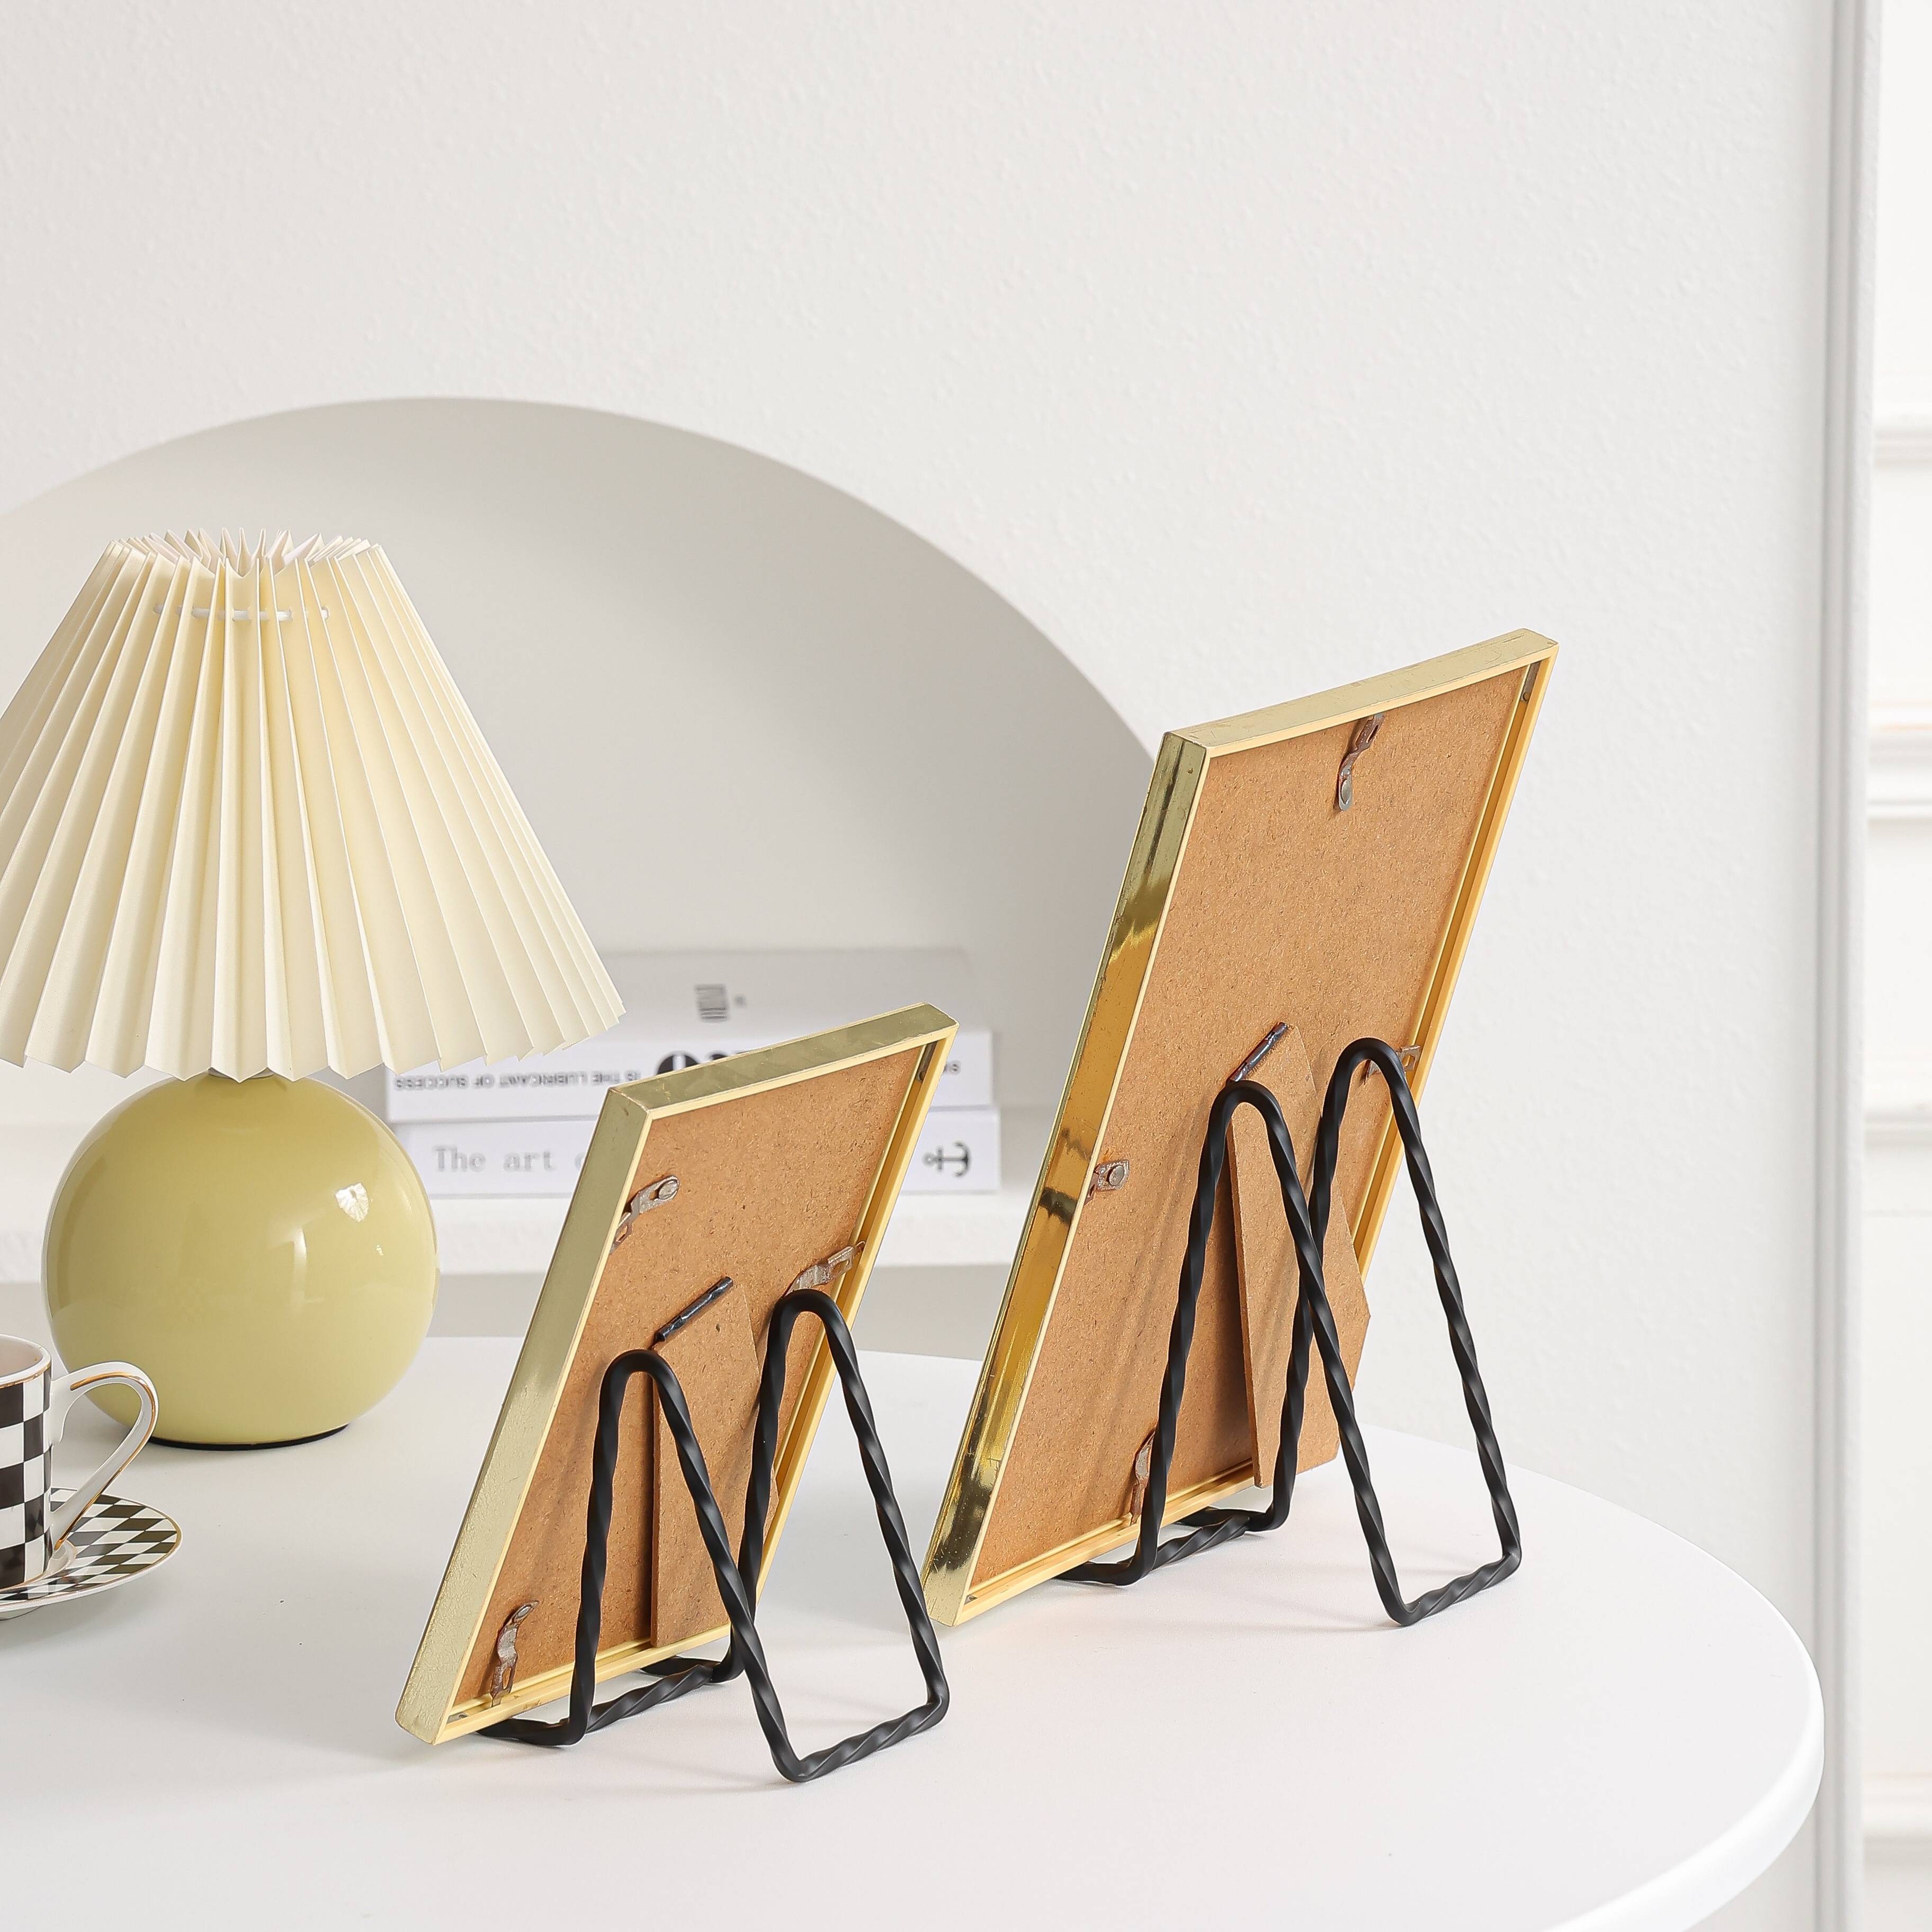  Plate Holder Easel Display Stand - 6 inch Metal Plate Stands  for Display - Tabletop Picture Stand - Black Iron Easels for Display  Pictures, Photo Frames, Book